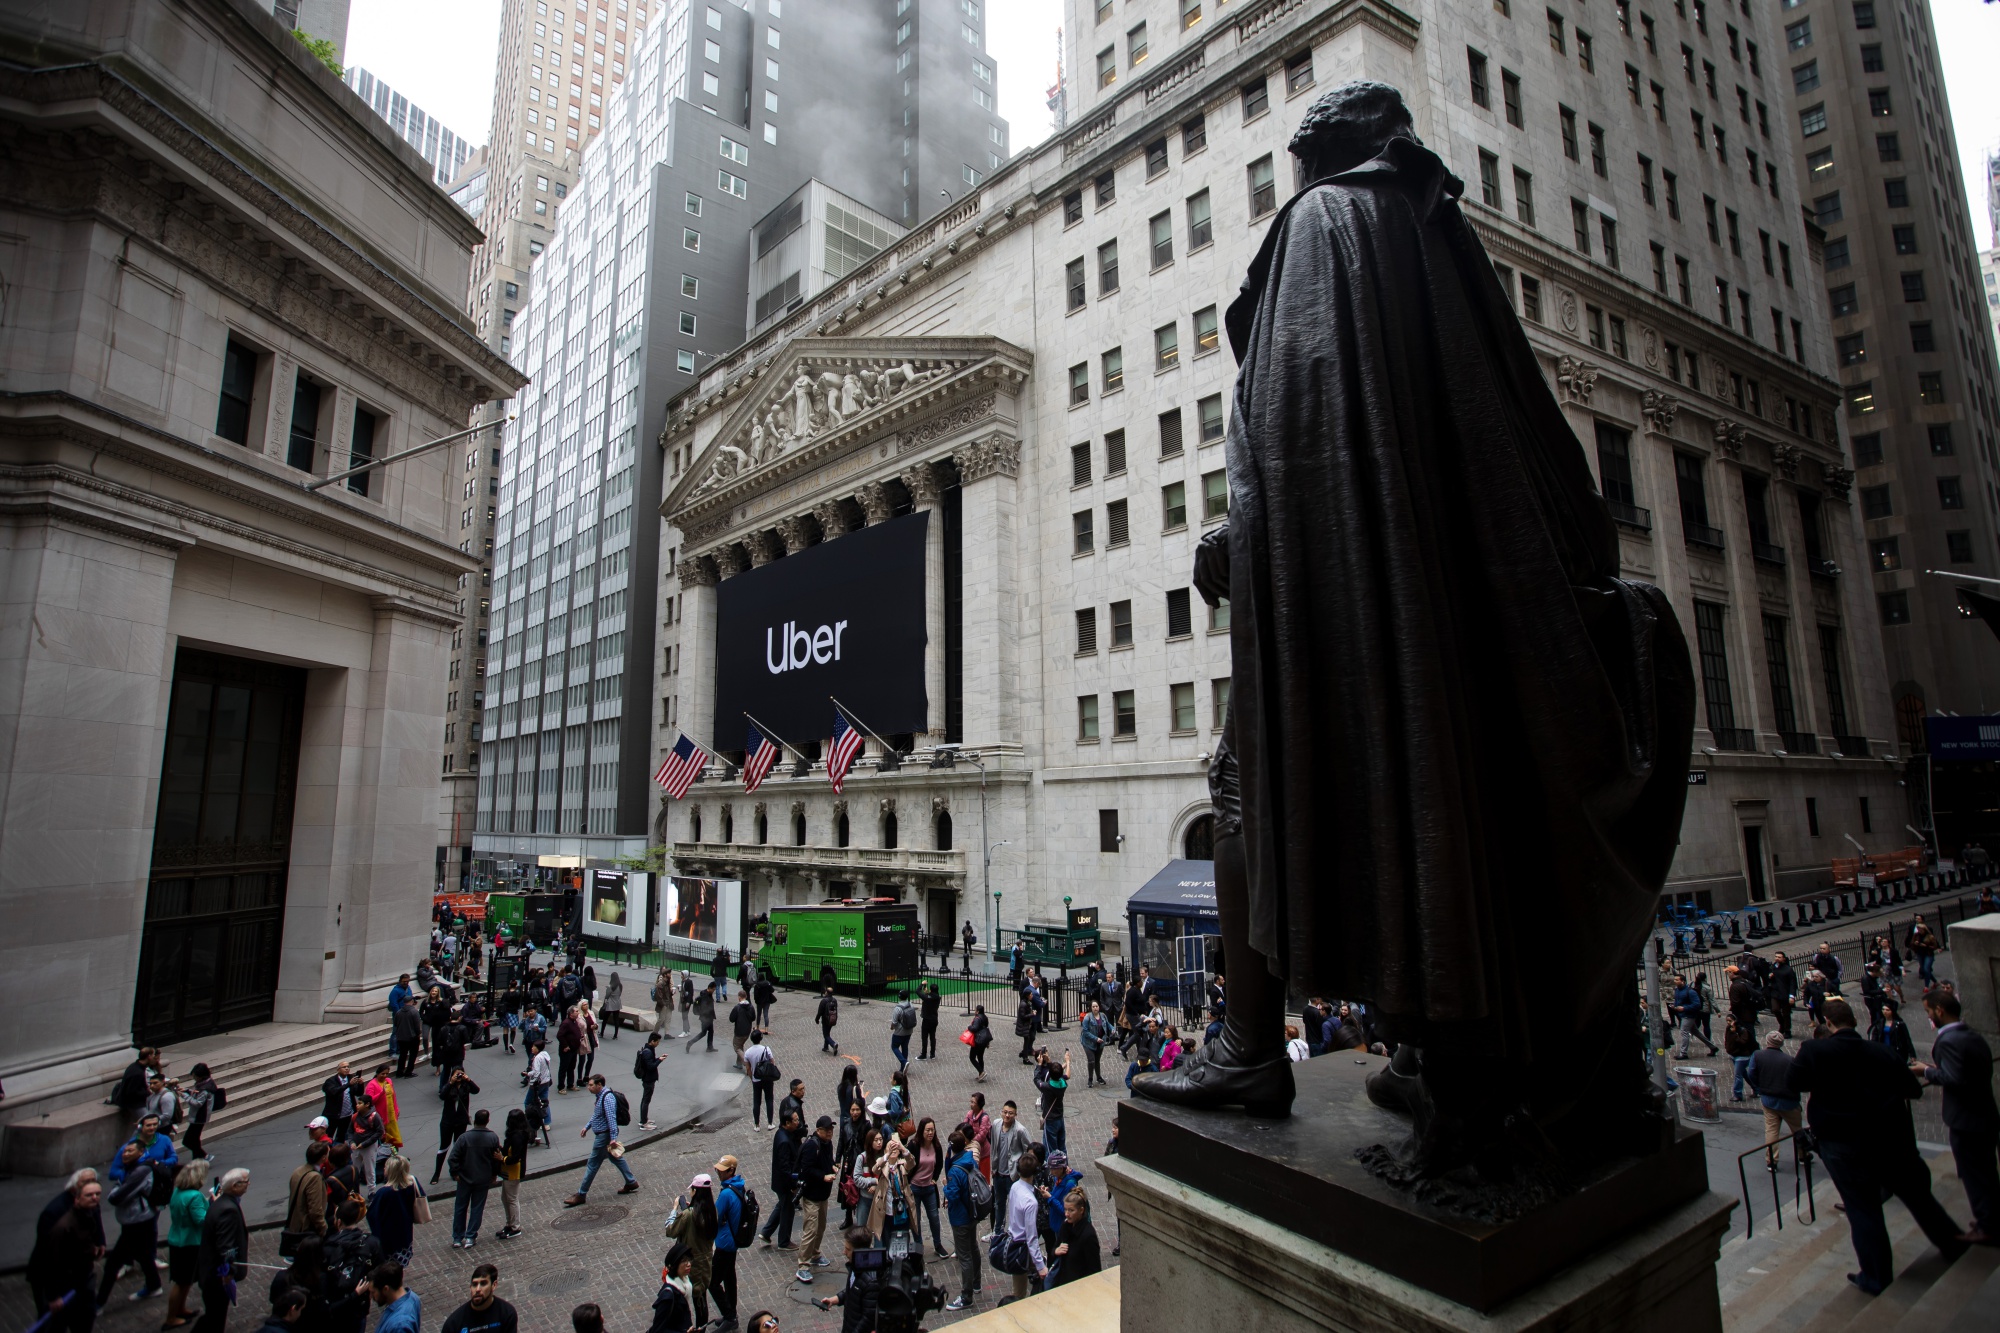 Pedestrians pass in front of the New York Stock Exchange during Uber Inc.'s IPO in New York on May 10.